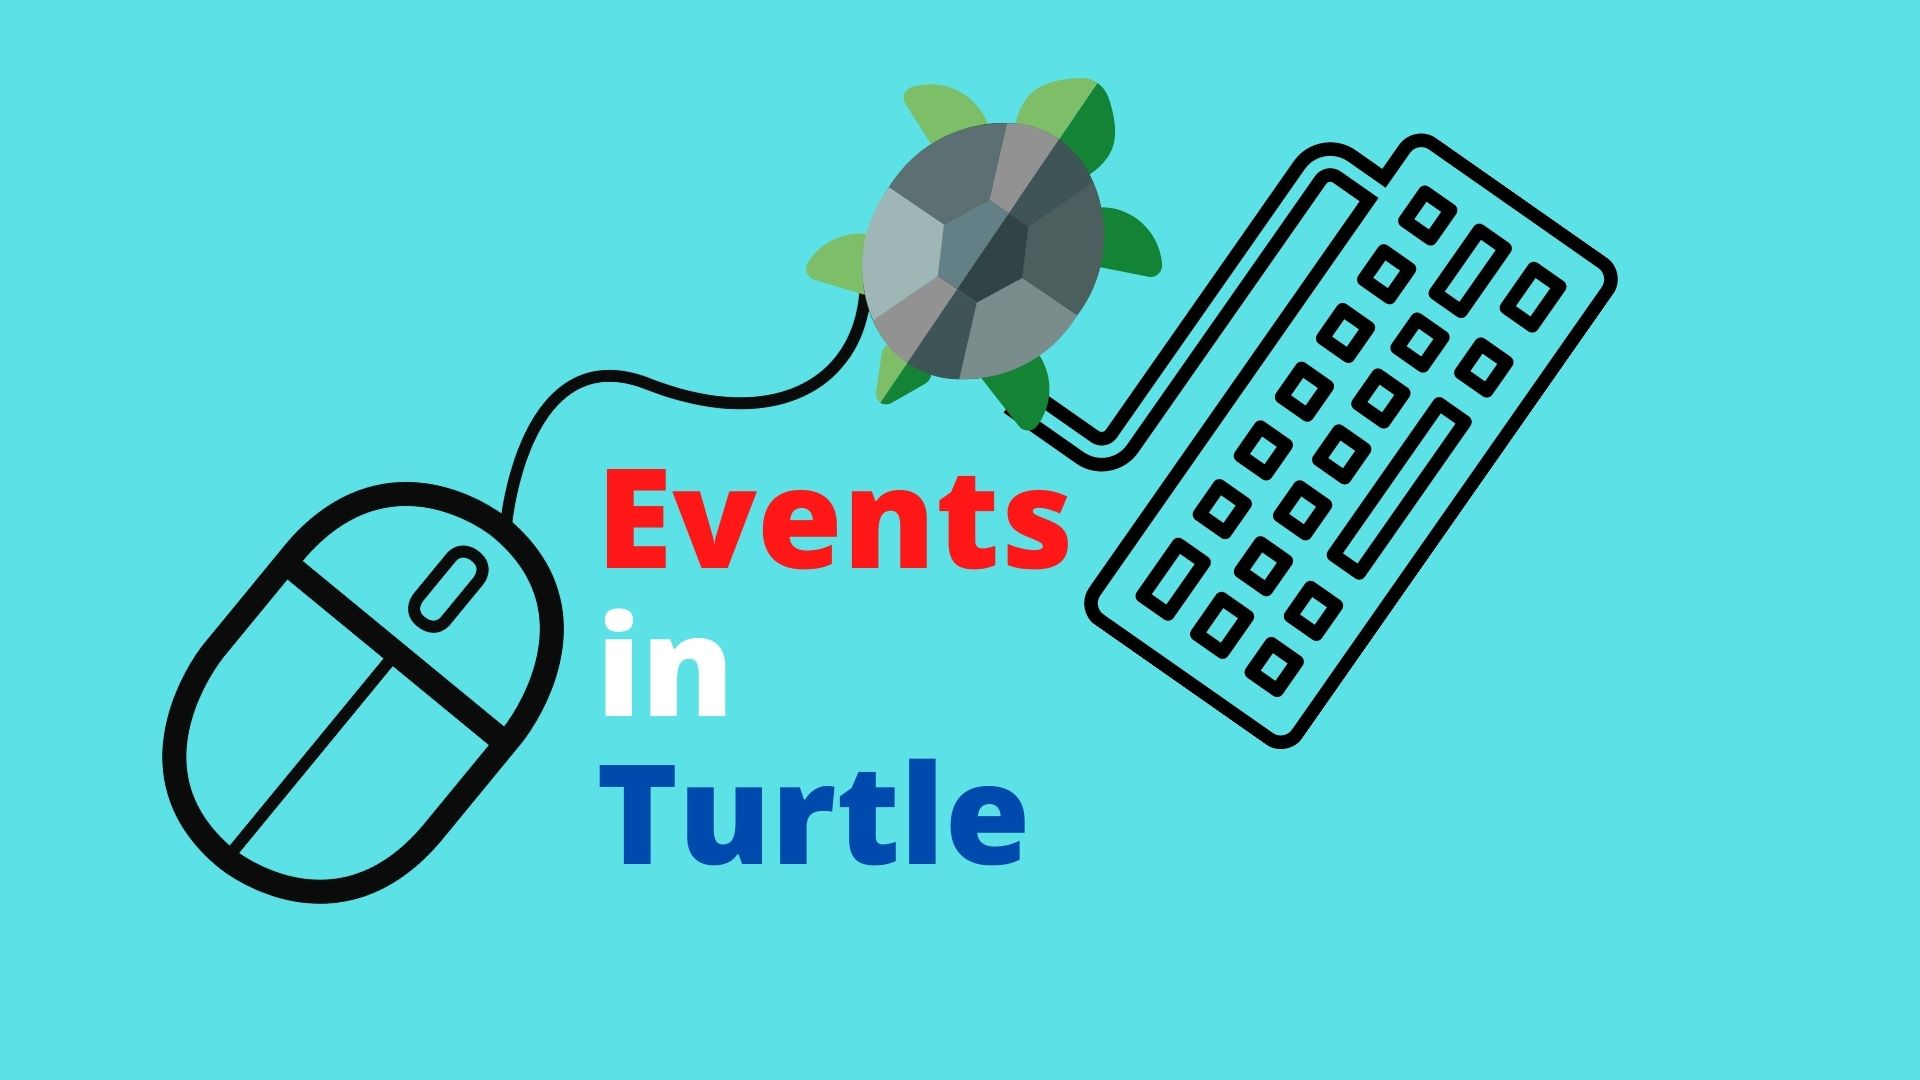 Events in turtle